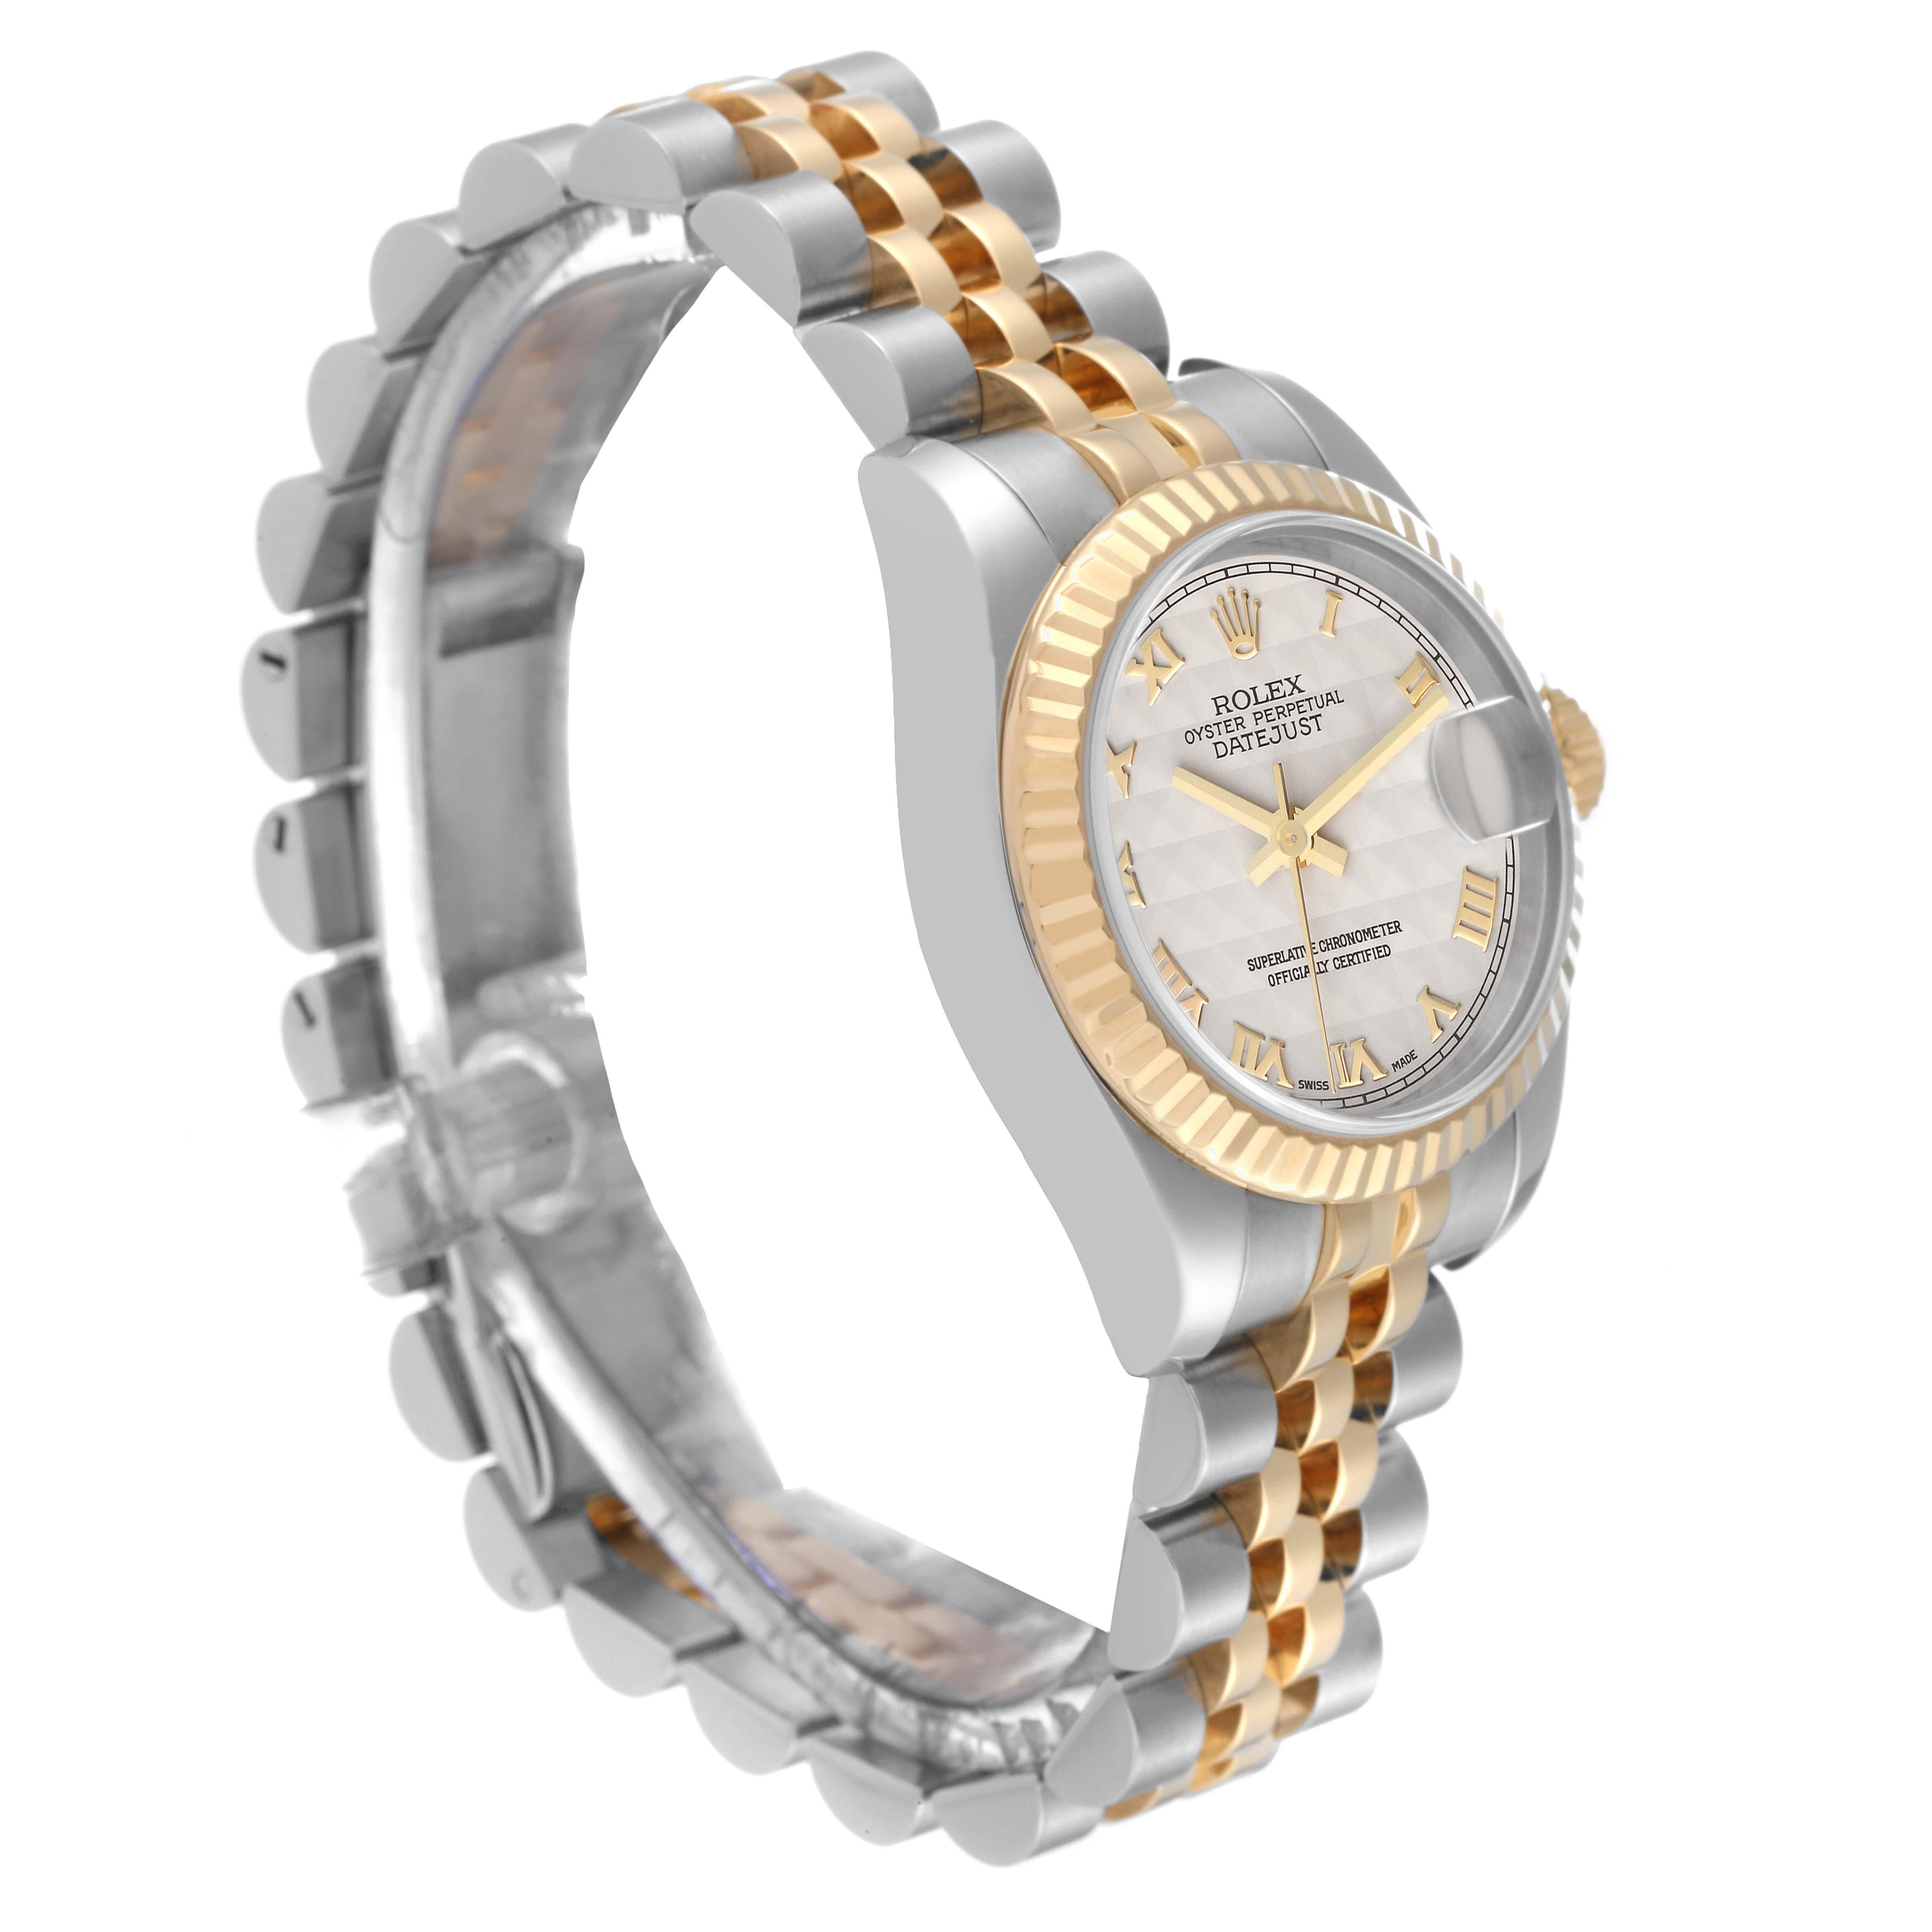 Rolex Datejust Steel Yellow Gold Ivory Pyramid Dial Ladies Watch 179173 In Excellent Condition For Sale In Atlanta, GA